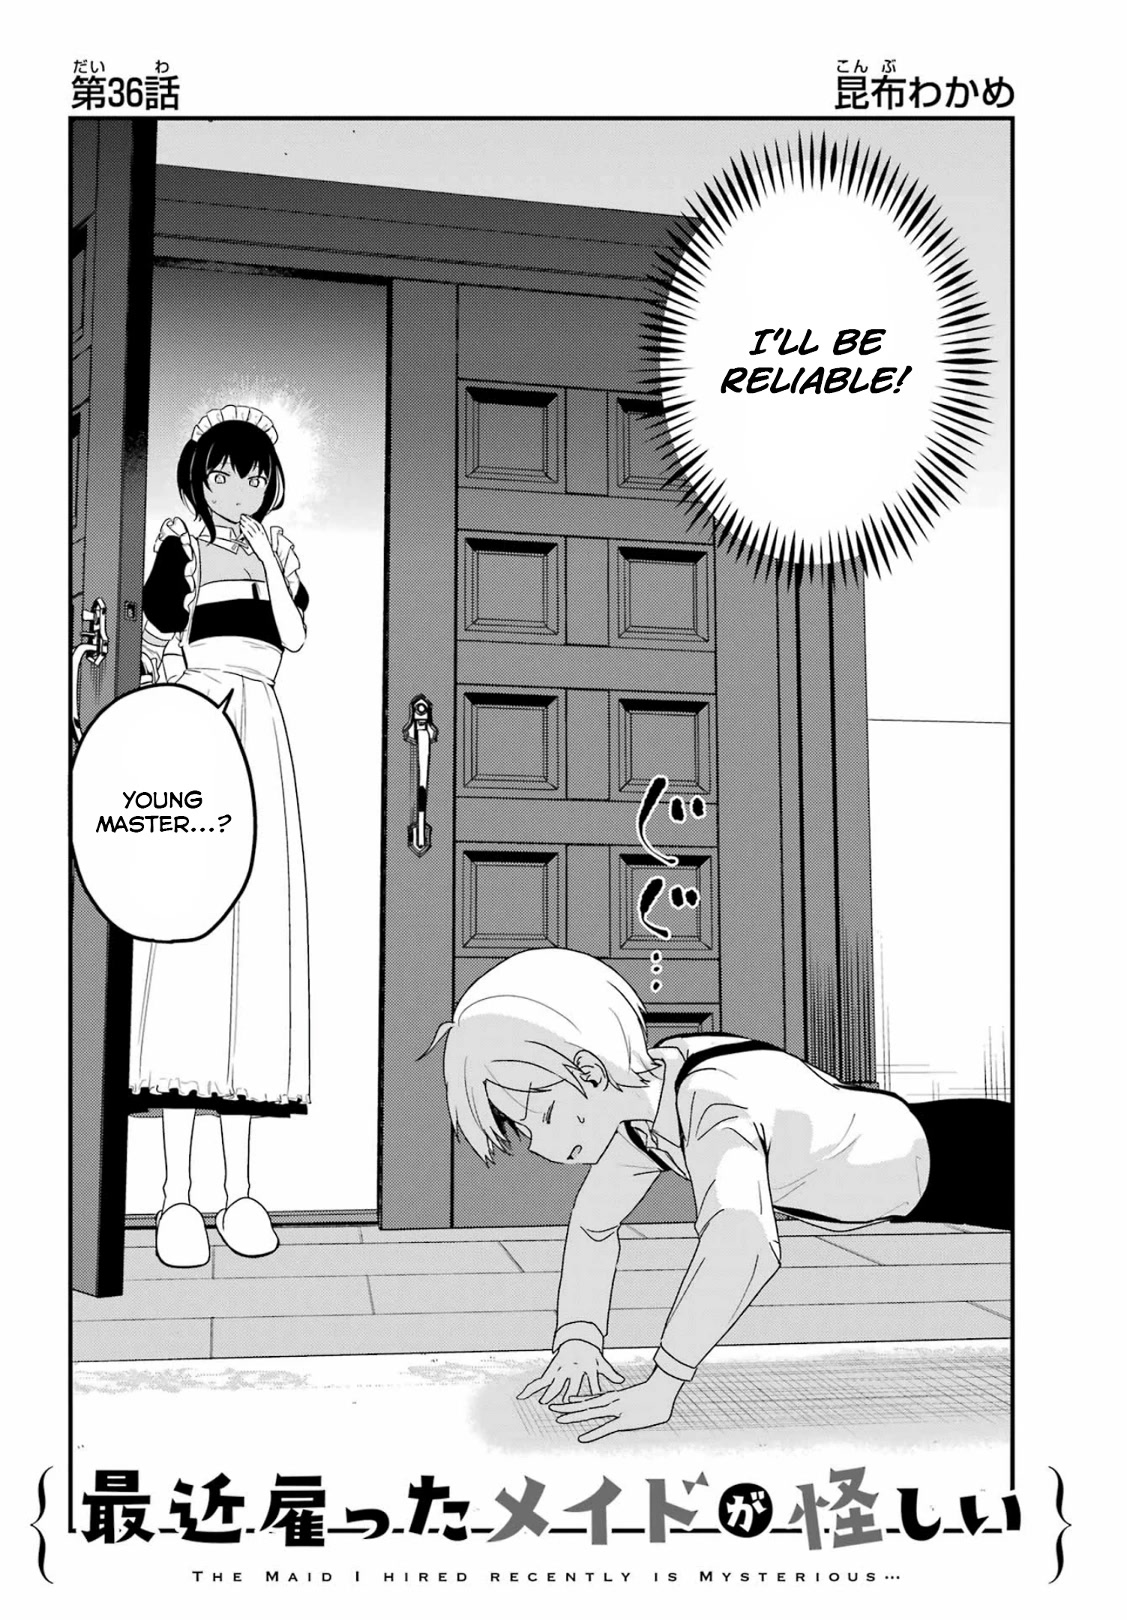 My Recently Hired Maid Is Suspicious (Serialization) Chapter 36 - Picture 2